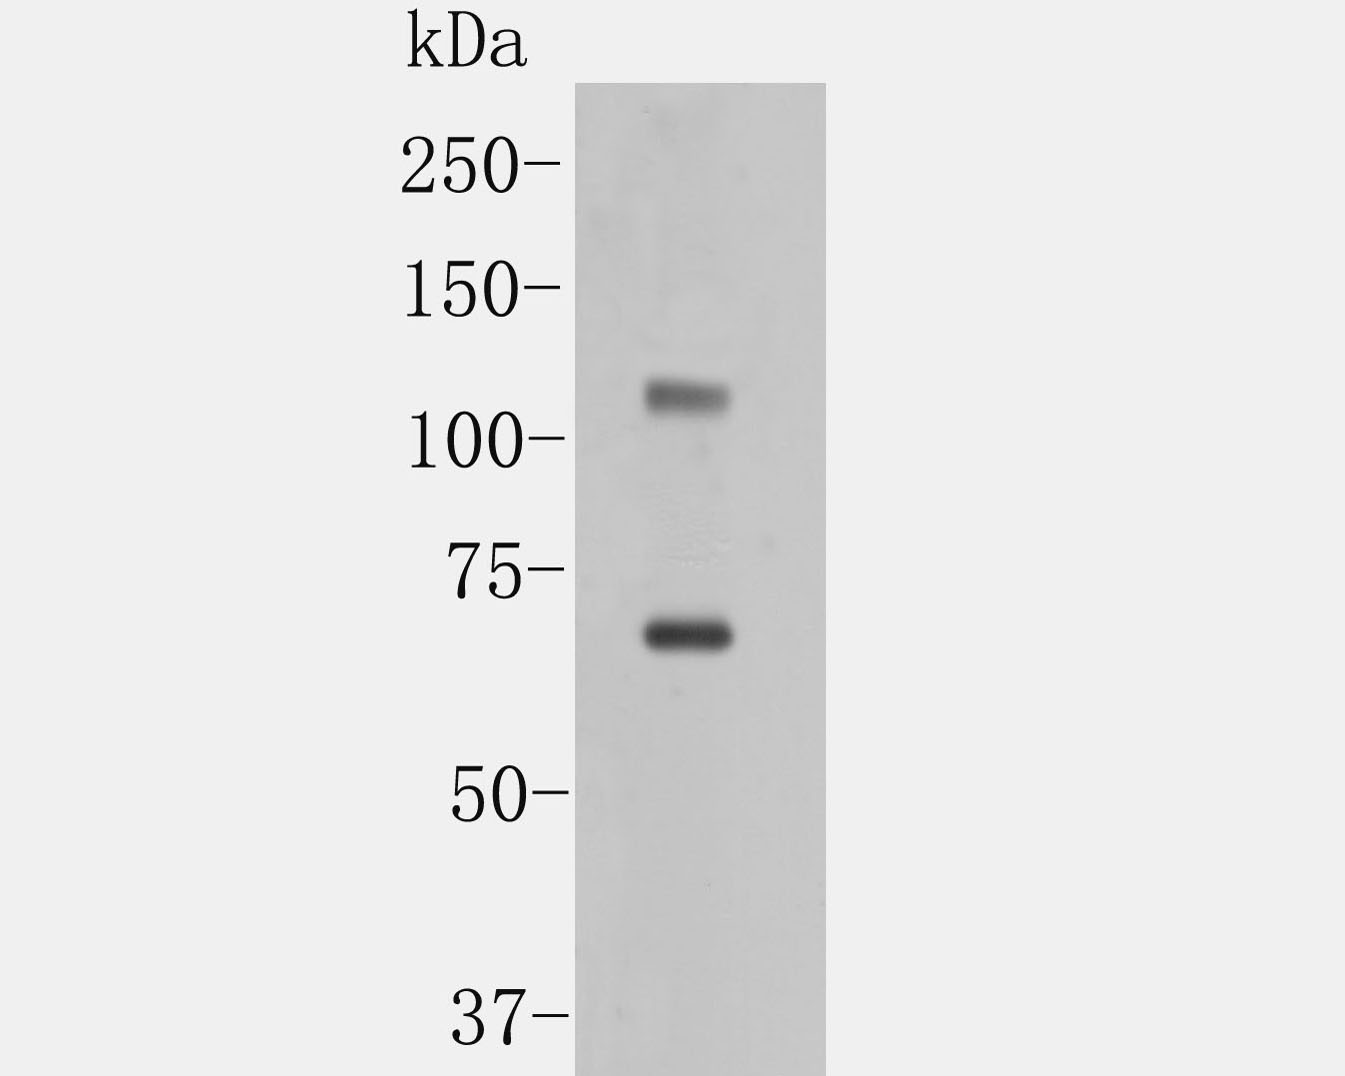 Western blot analysis of ACE2 on human kidney tissue lysate. Proteins were transferred to a PVDF membrane and blocked with 5% BSA in PBS for 1 hour at room temperature. The primary antibody (ER1902-40, 1/500) was used in 5% BSA at room temperature for 2 hours. Goat Anti-Rabbit IgG - HRP Secondary Antibody (HA1001) at 1:5,000 dilution was used for 1 hour at room temperature.